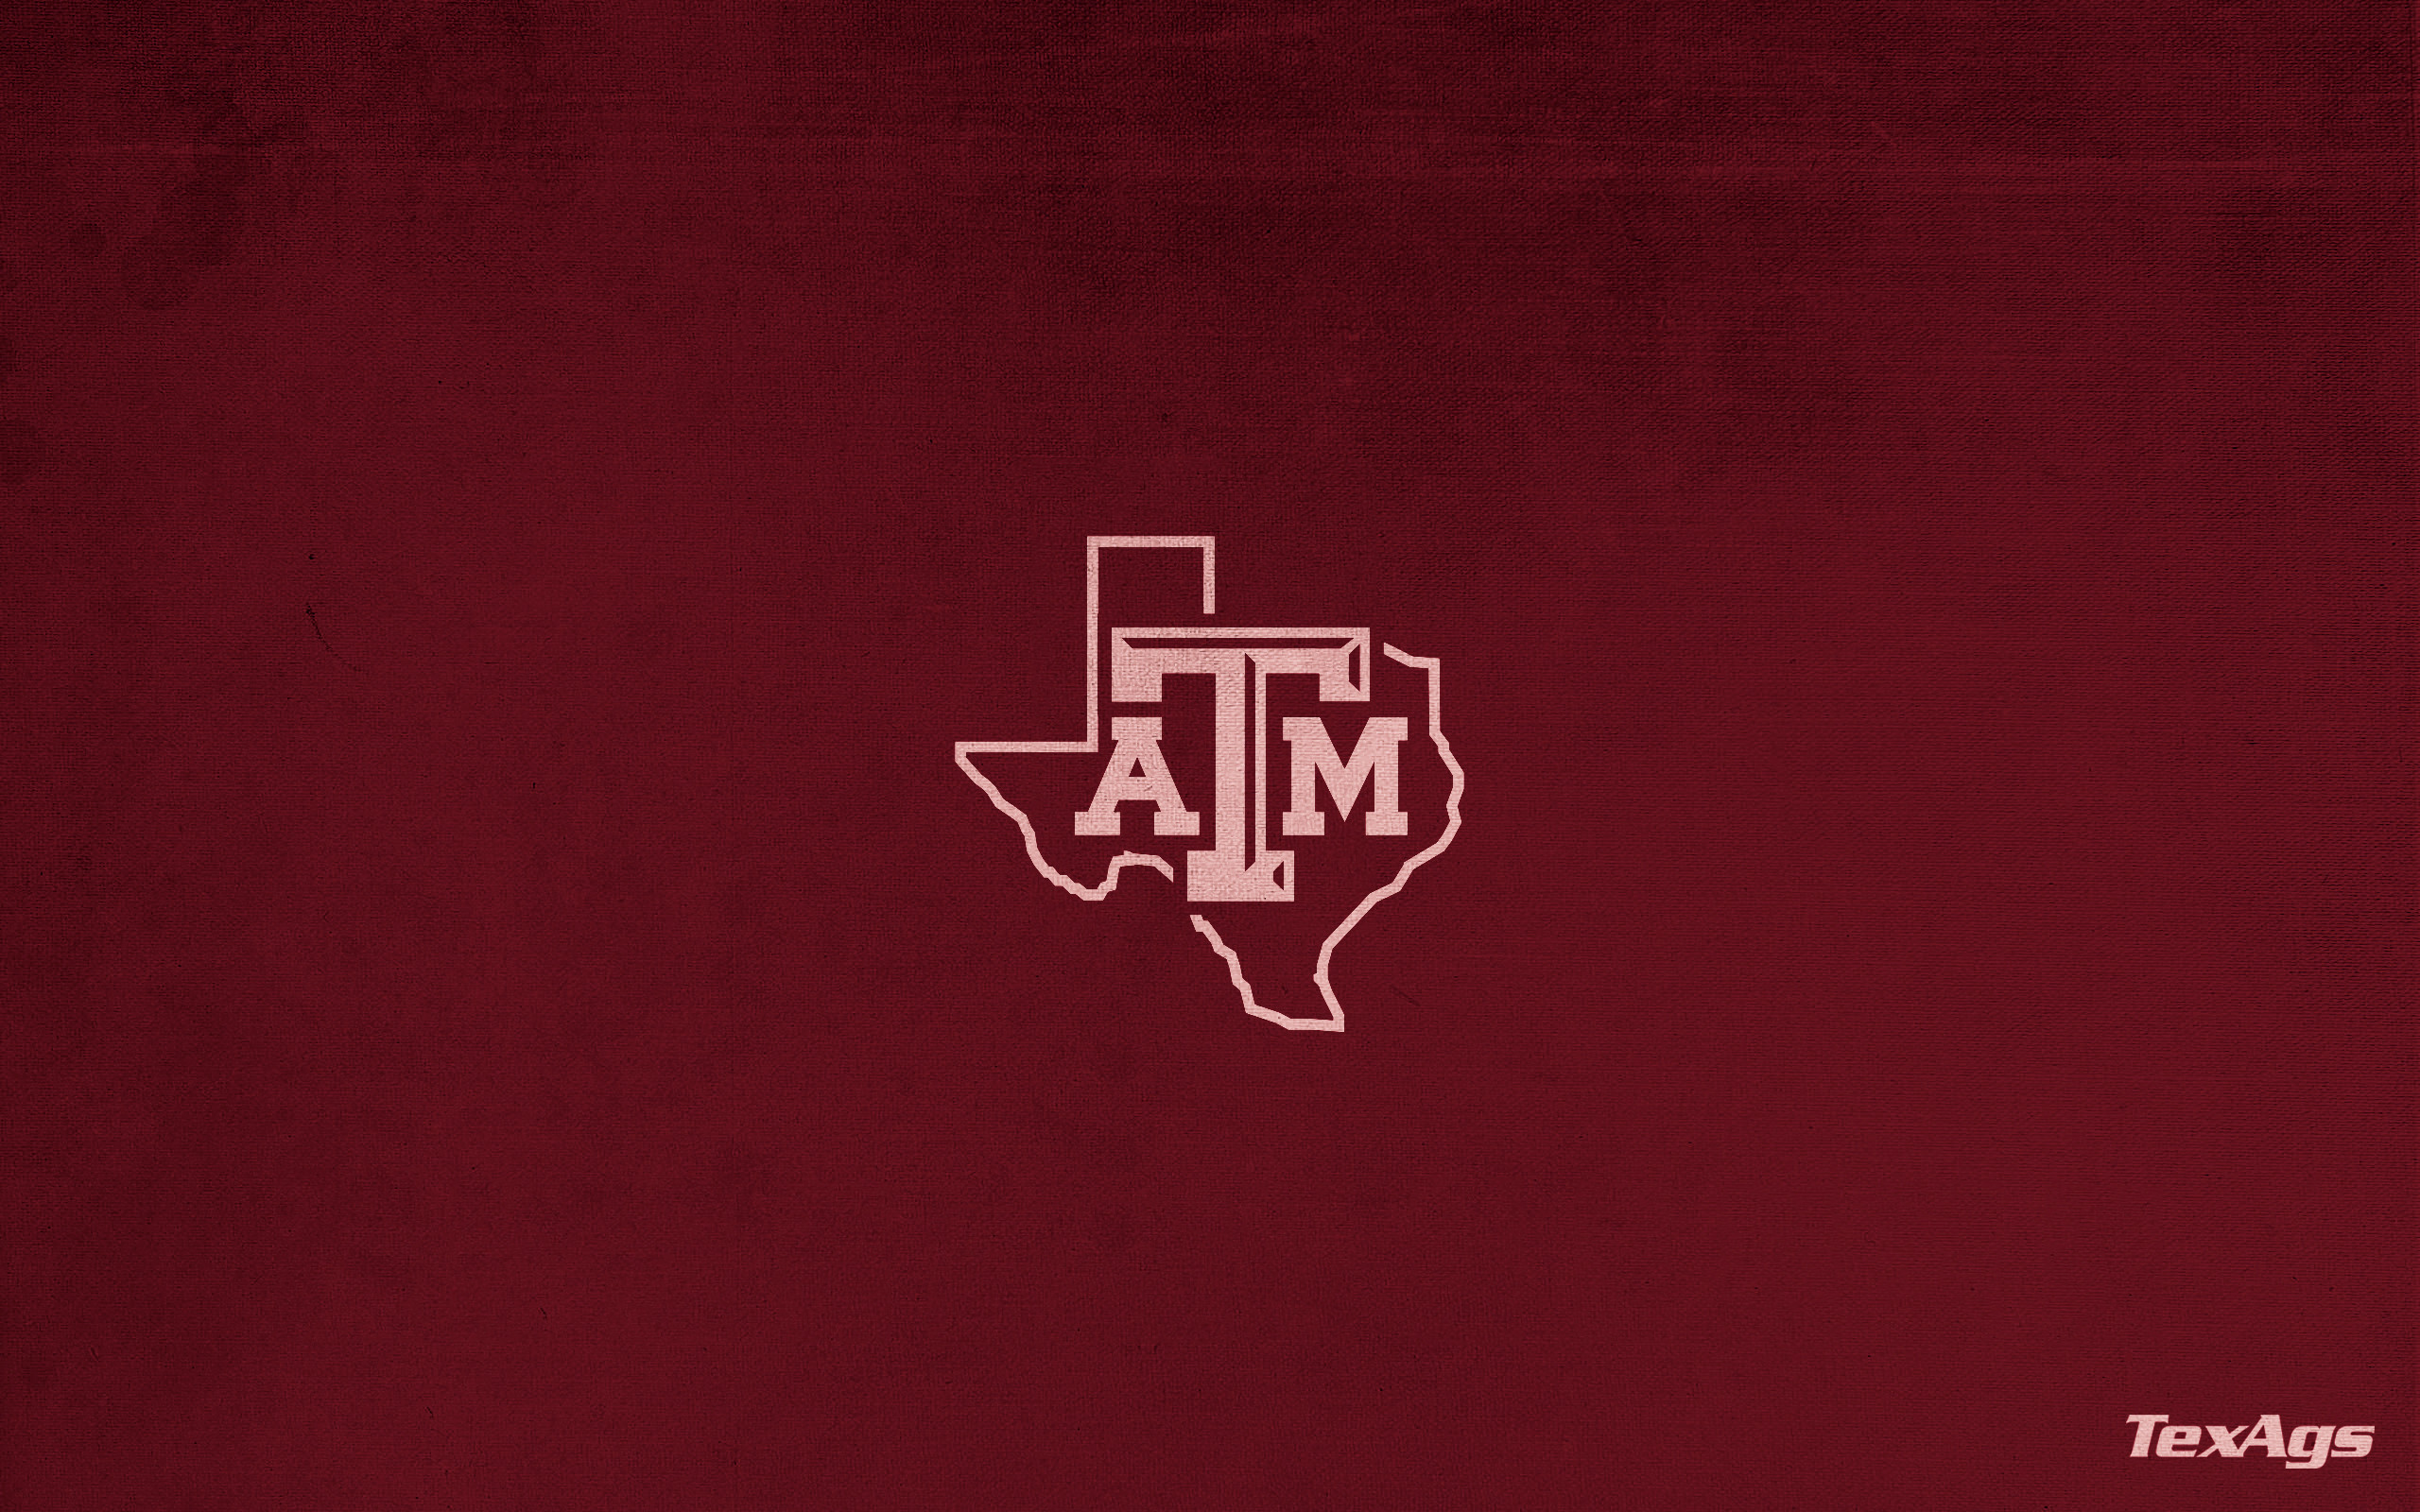 Texas Am University Wallpapers 75 images